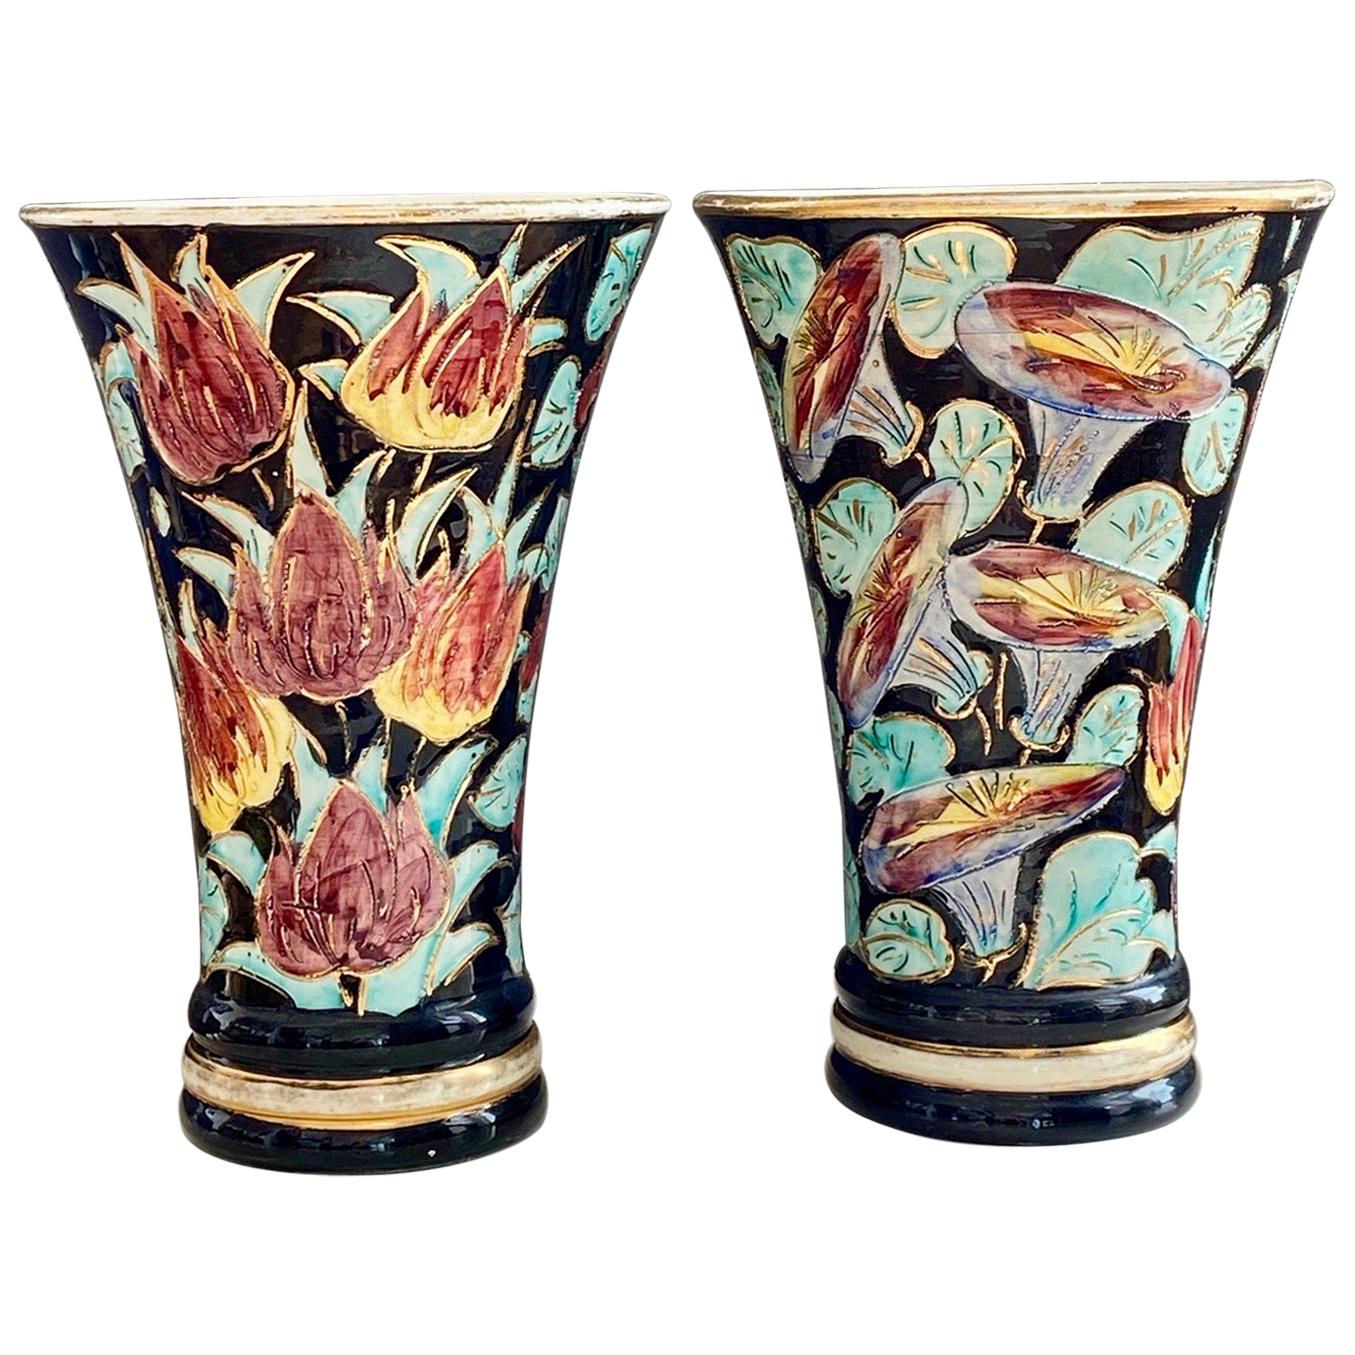 Vallauris Ceramic Vases with Floral Motifs, from circa 1960 For Sale